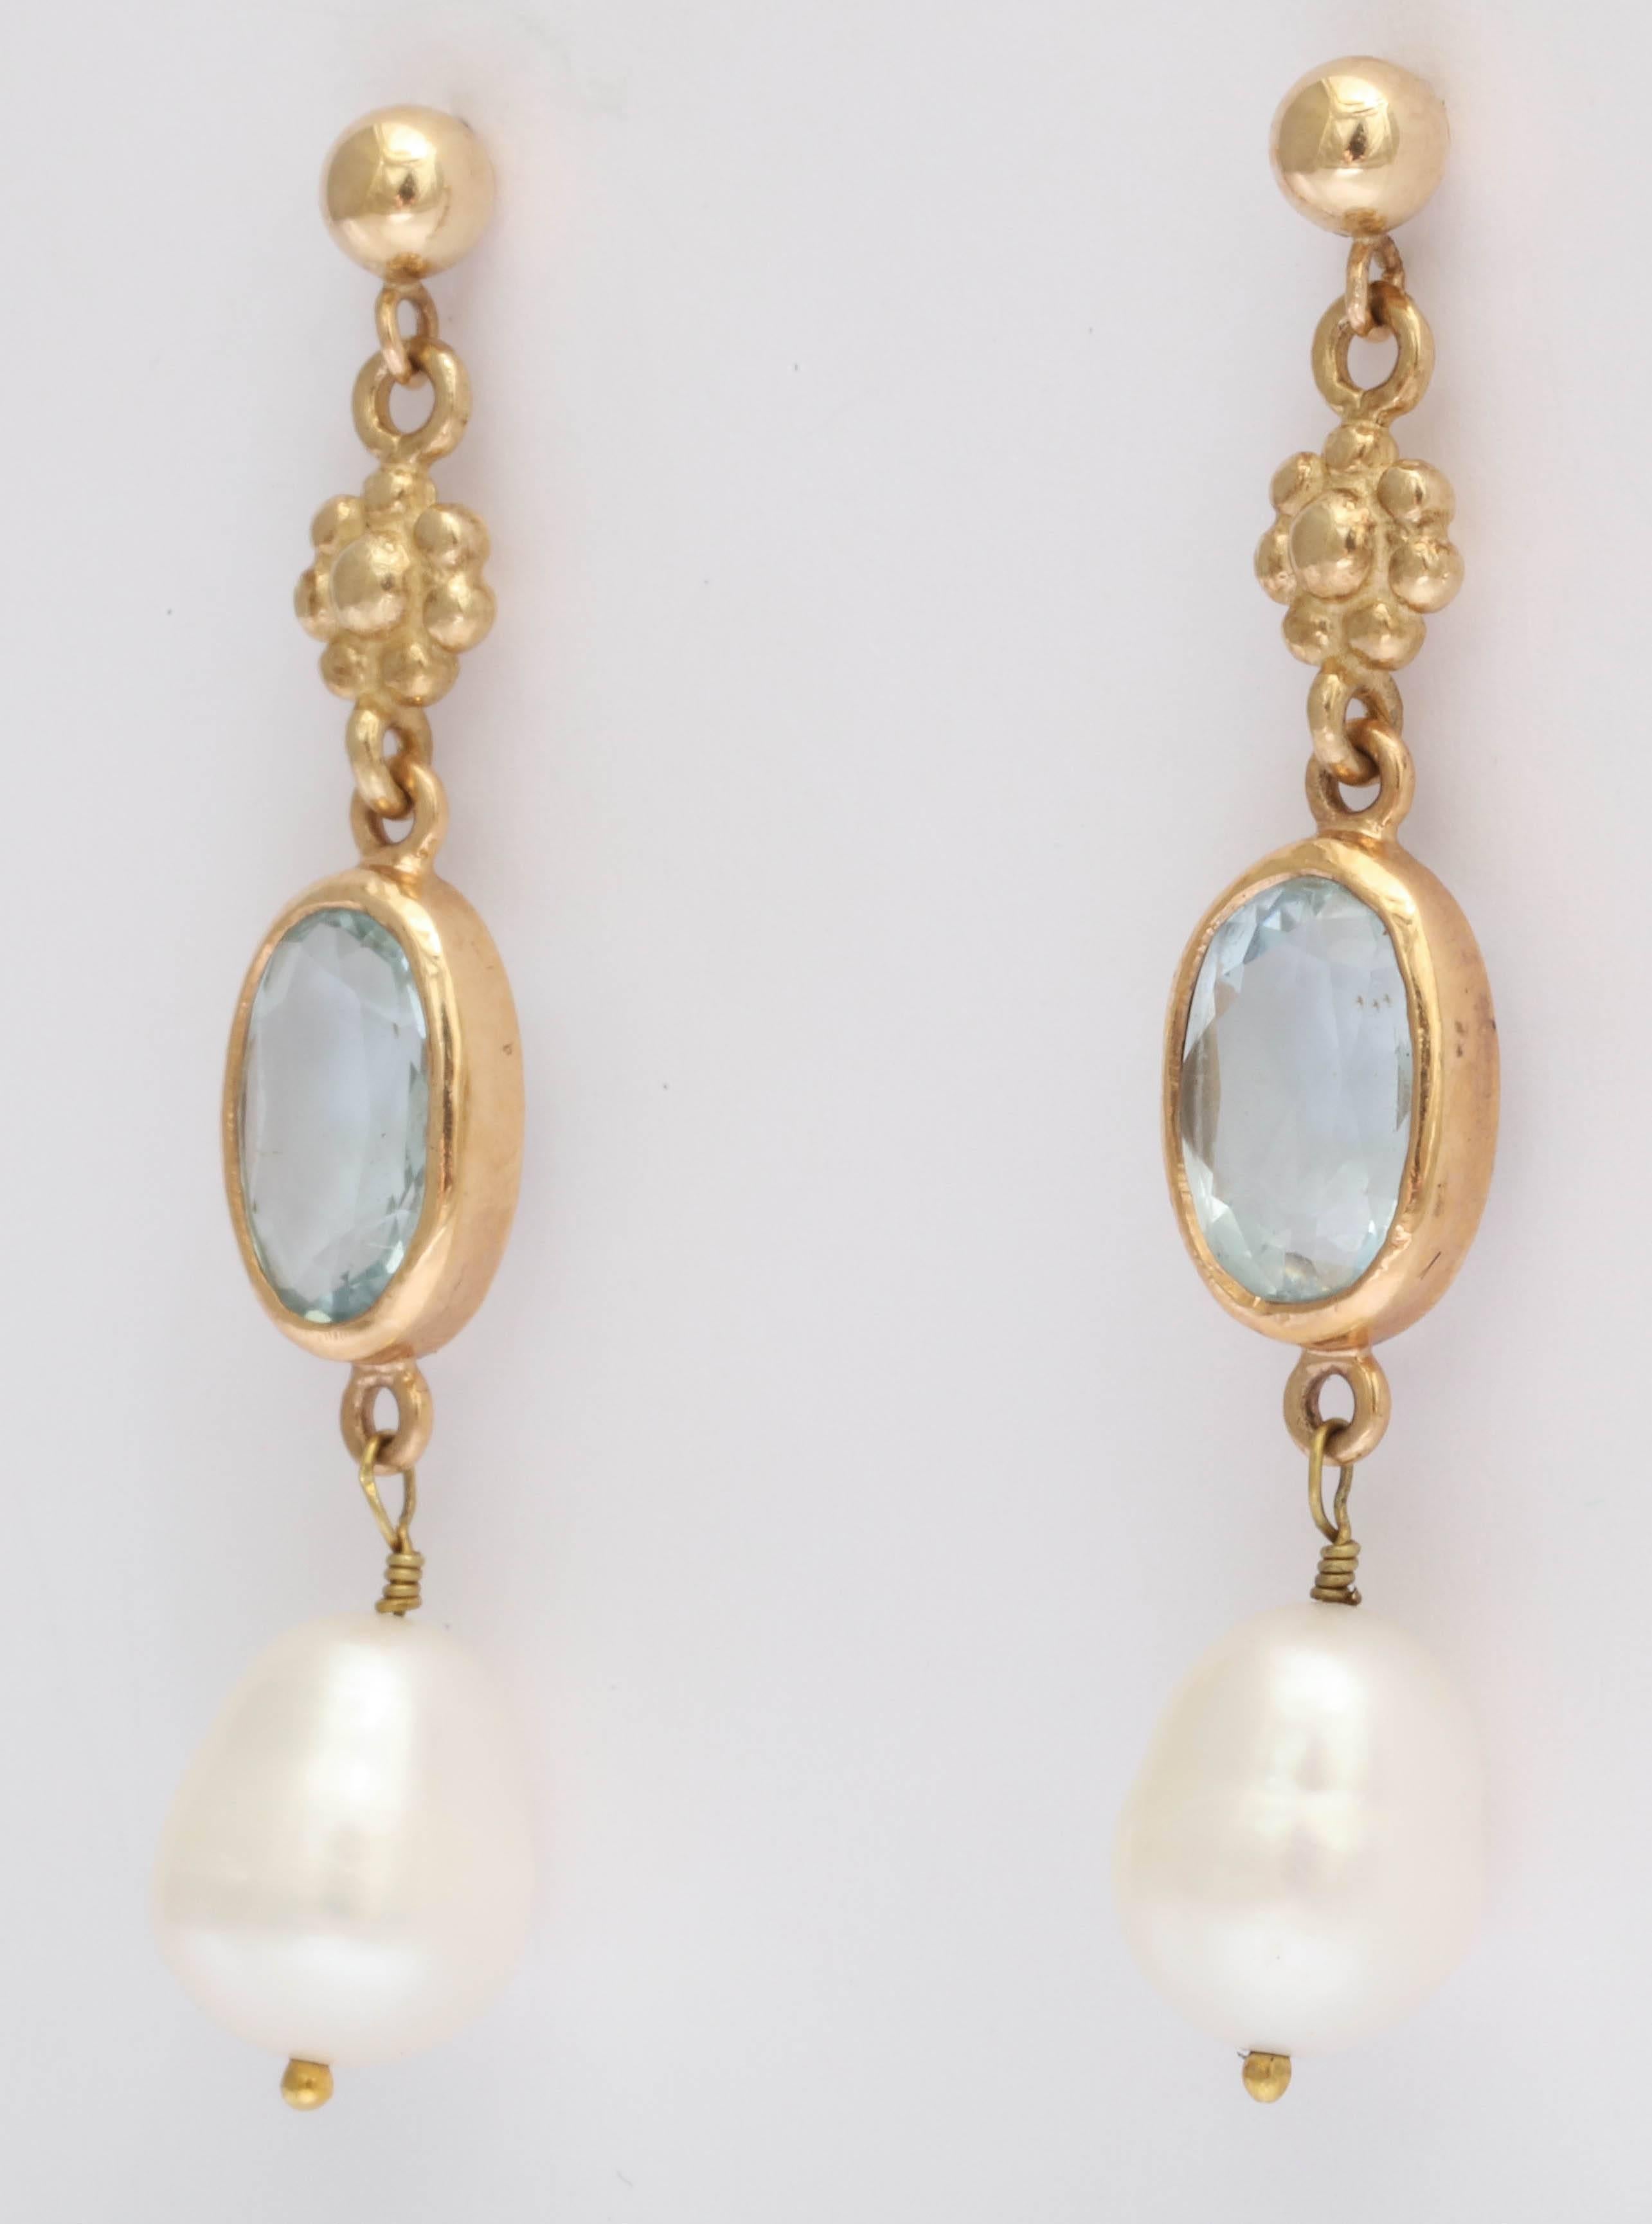 The oval aquamarines are a beautiful blue. They are faceted and  7 X 12 mm, set in a 14 kt gold bezel setting. The earring has a ball and post top with a gold rosette connecting the aquamarine. Off the end of the earring hangs  a pear shape fresh